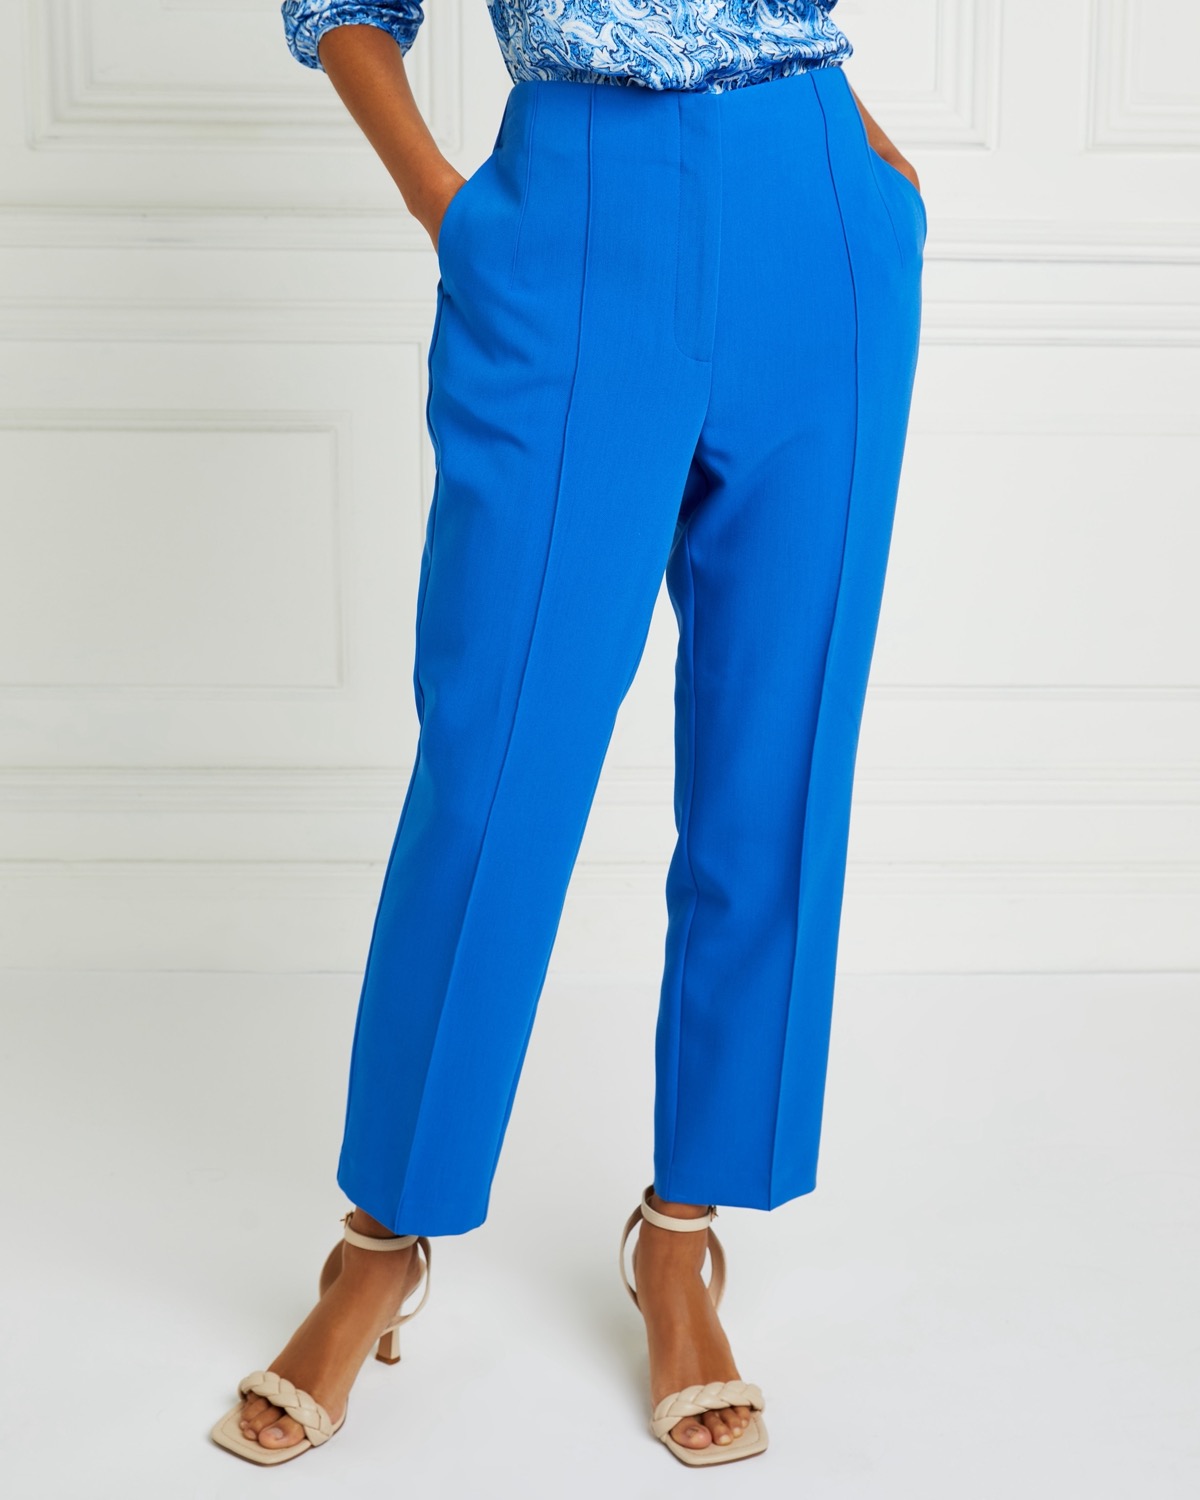 Trousers  Jeans for Ladies Online in UK  TJC